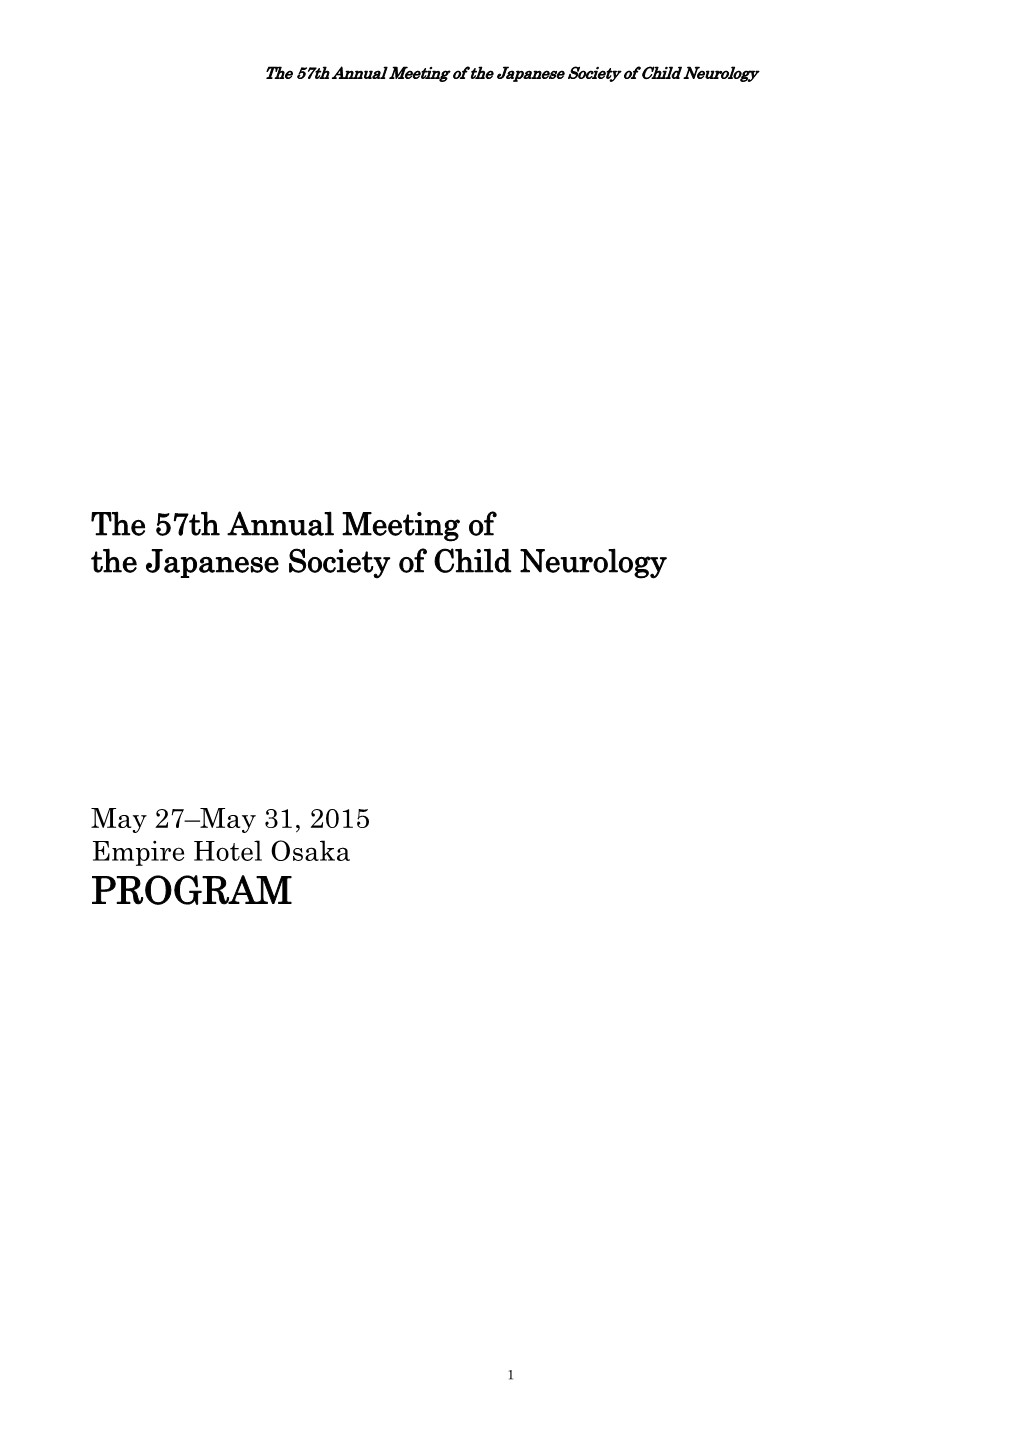 57Th Annual Meeting of the Japanese Society of Child Neurology